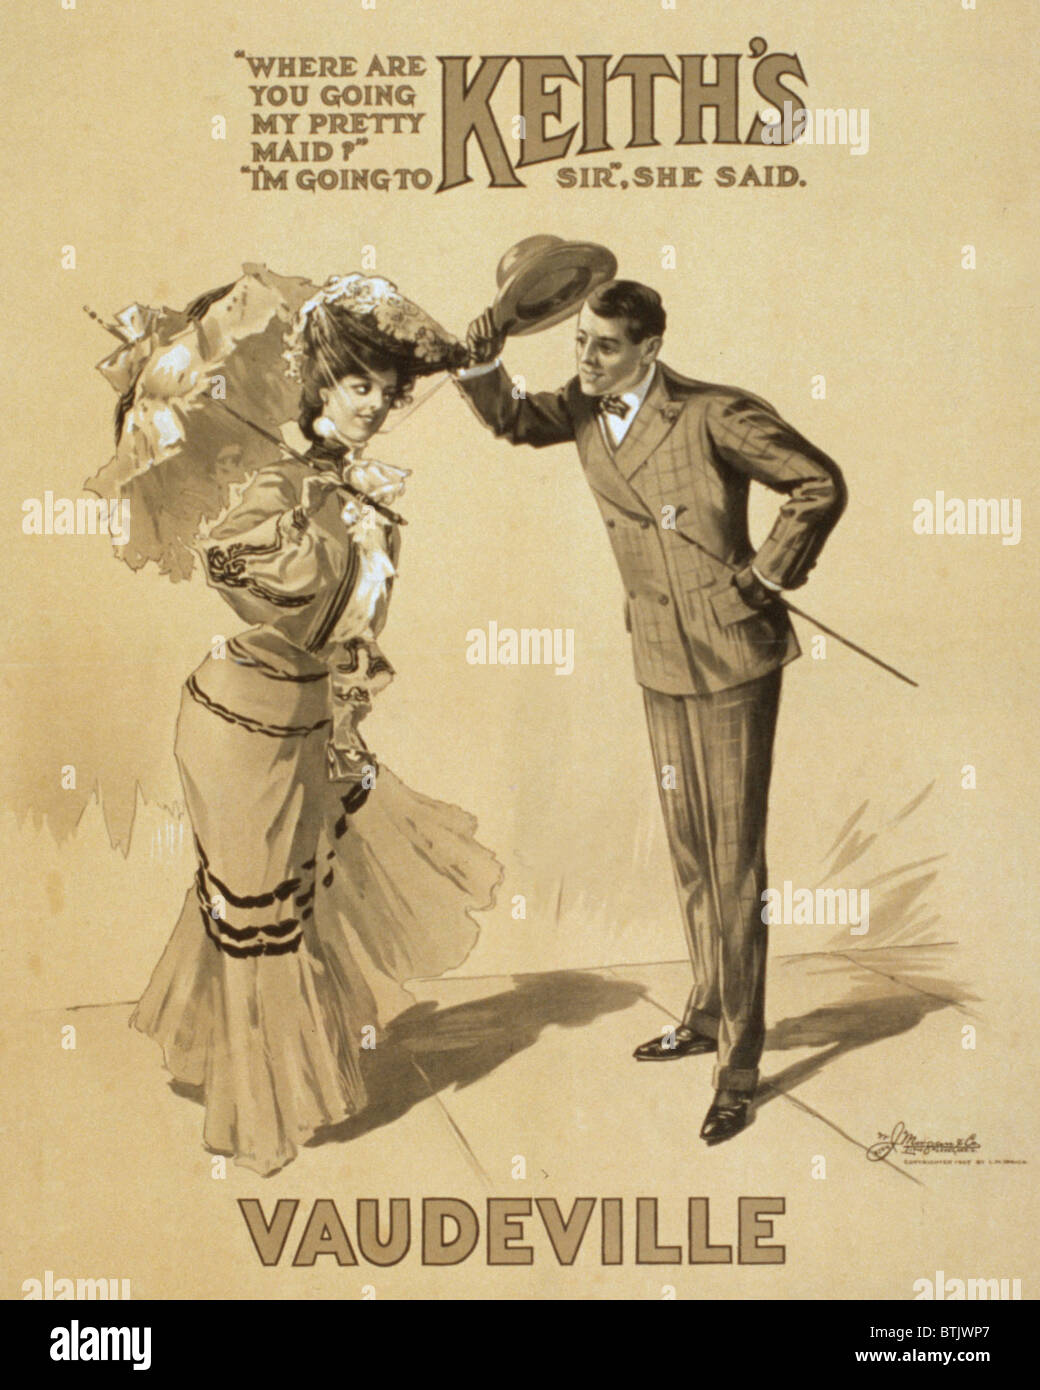 Poster advertising Keith's Vaudeville, original title: Where are you going my pretty maid?' 'I'm going to Keith's Vaudeville, Sir,' she said, W.J. Morgan & Co. Lith., Cleveland, Ohio, by L.M. Eirick, 1905. Stock Photo